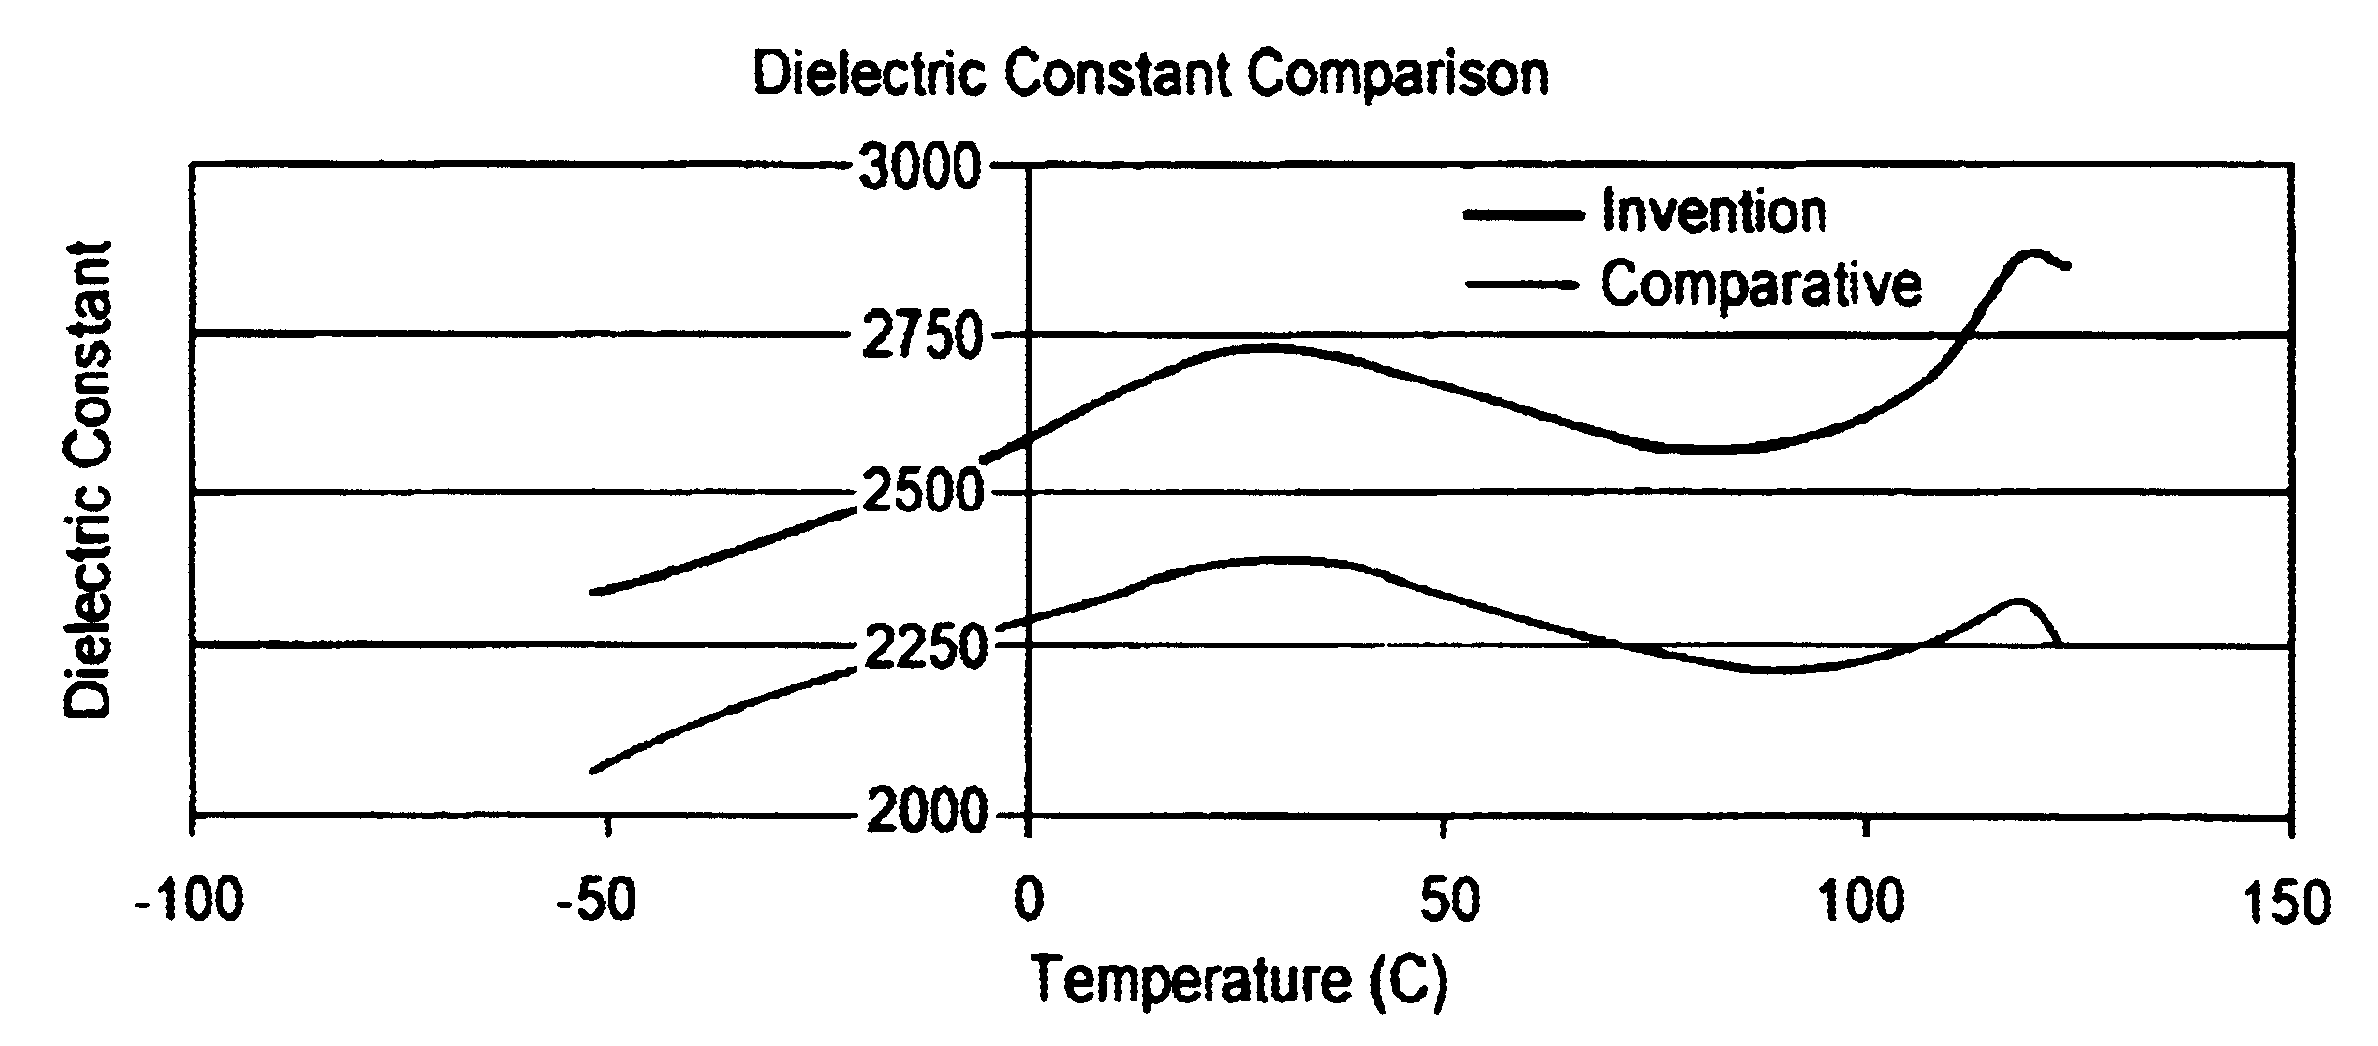 Dielectric compositions and methods to form the same